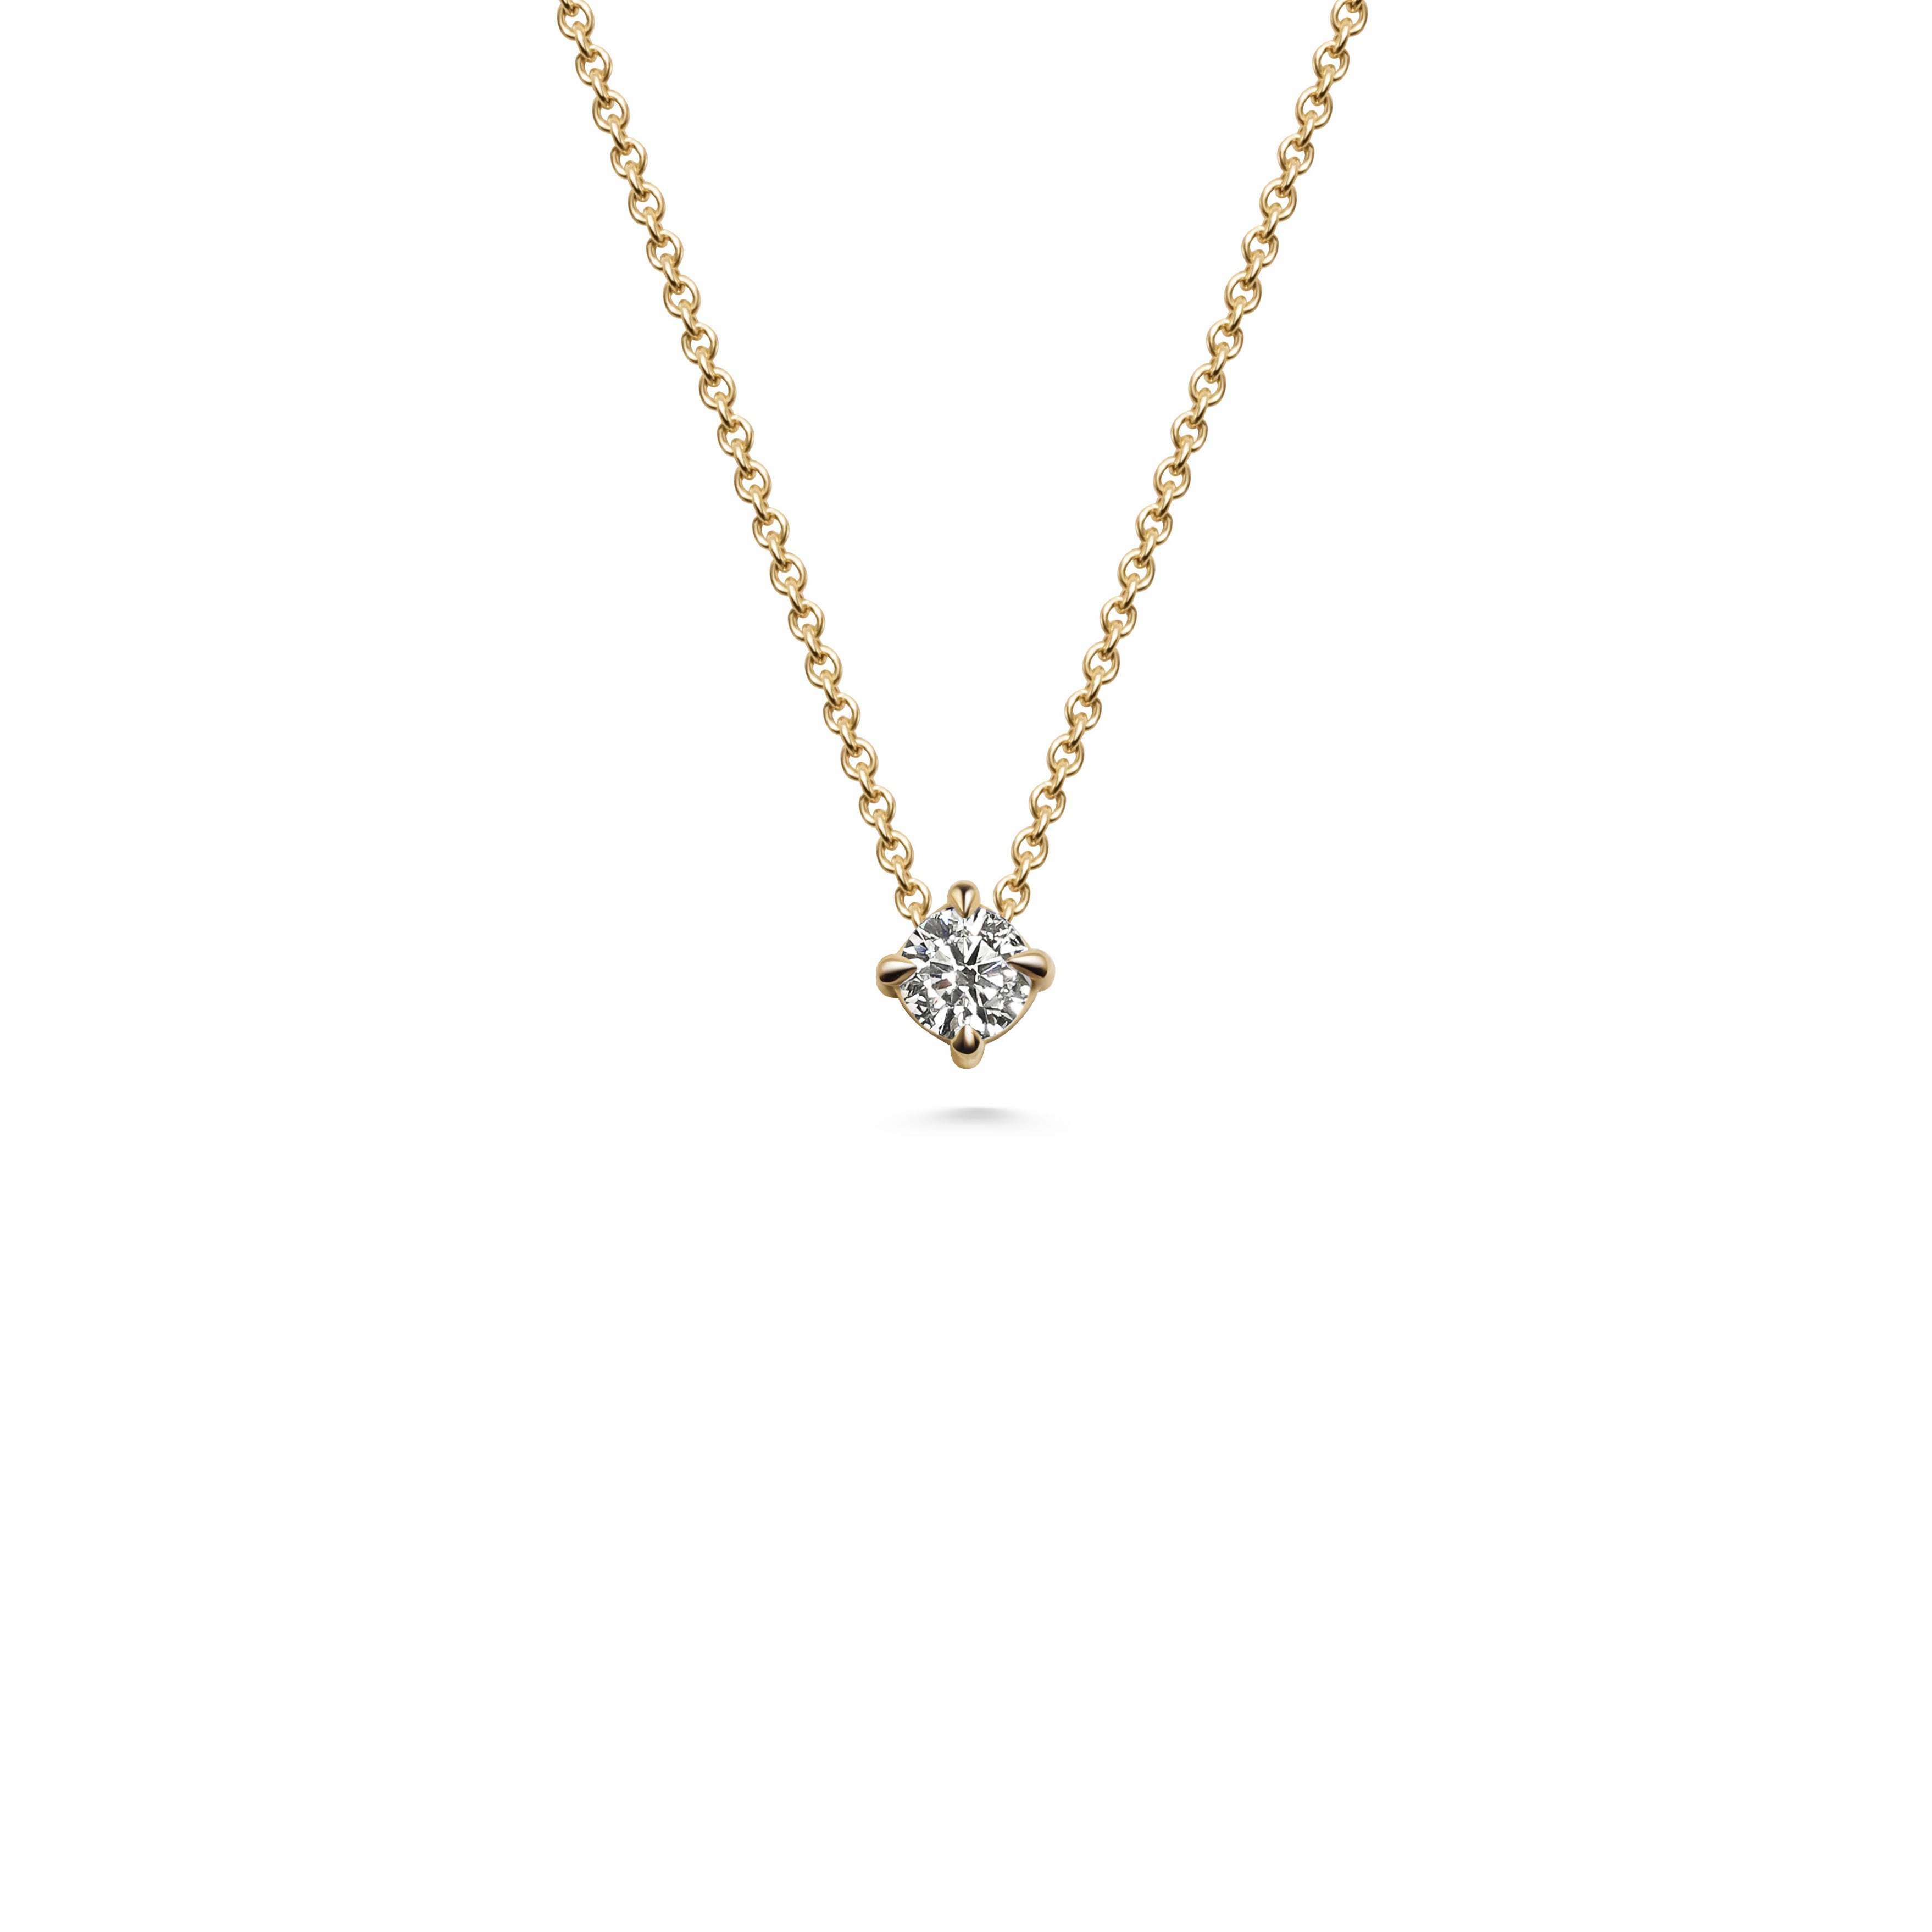 The 3mm White Diamond Slider Necklace by East London jeweller Rachel Boston | Discover our collections of unique and timeless engagement rings, wedding rings, and modern fine jewellery.